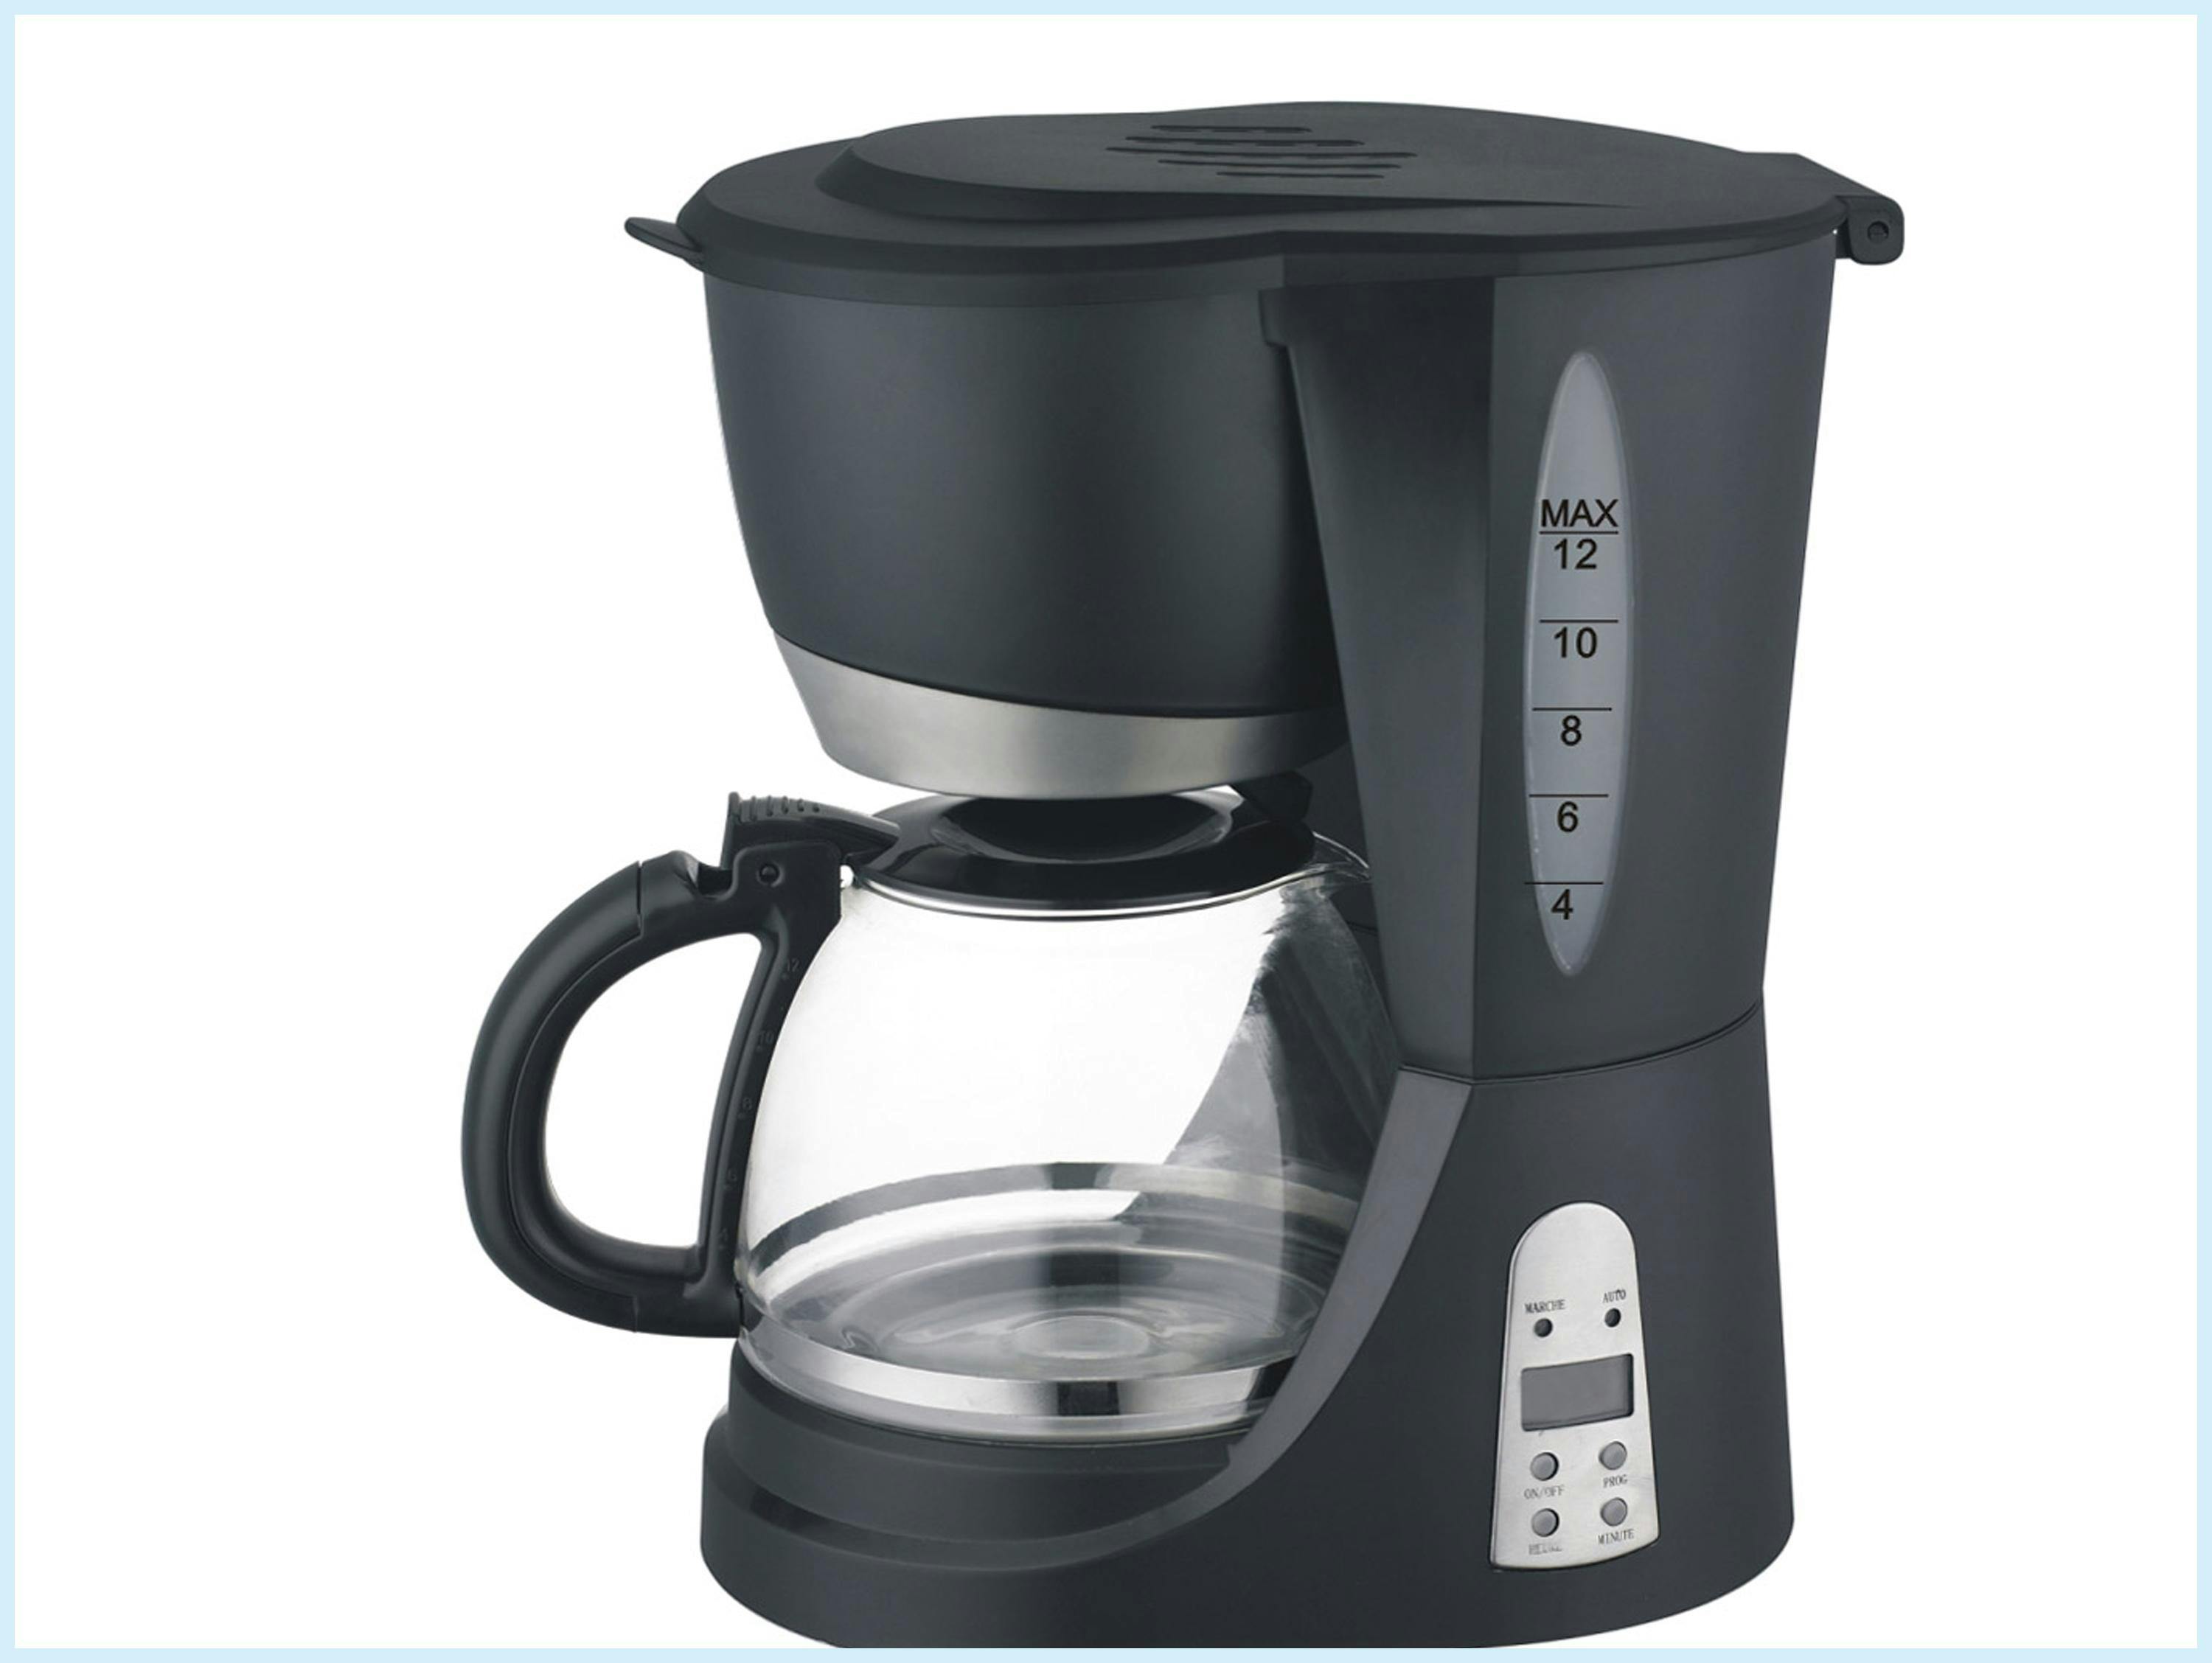 CAFETERA SOLAC CF-4036